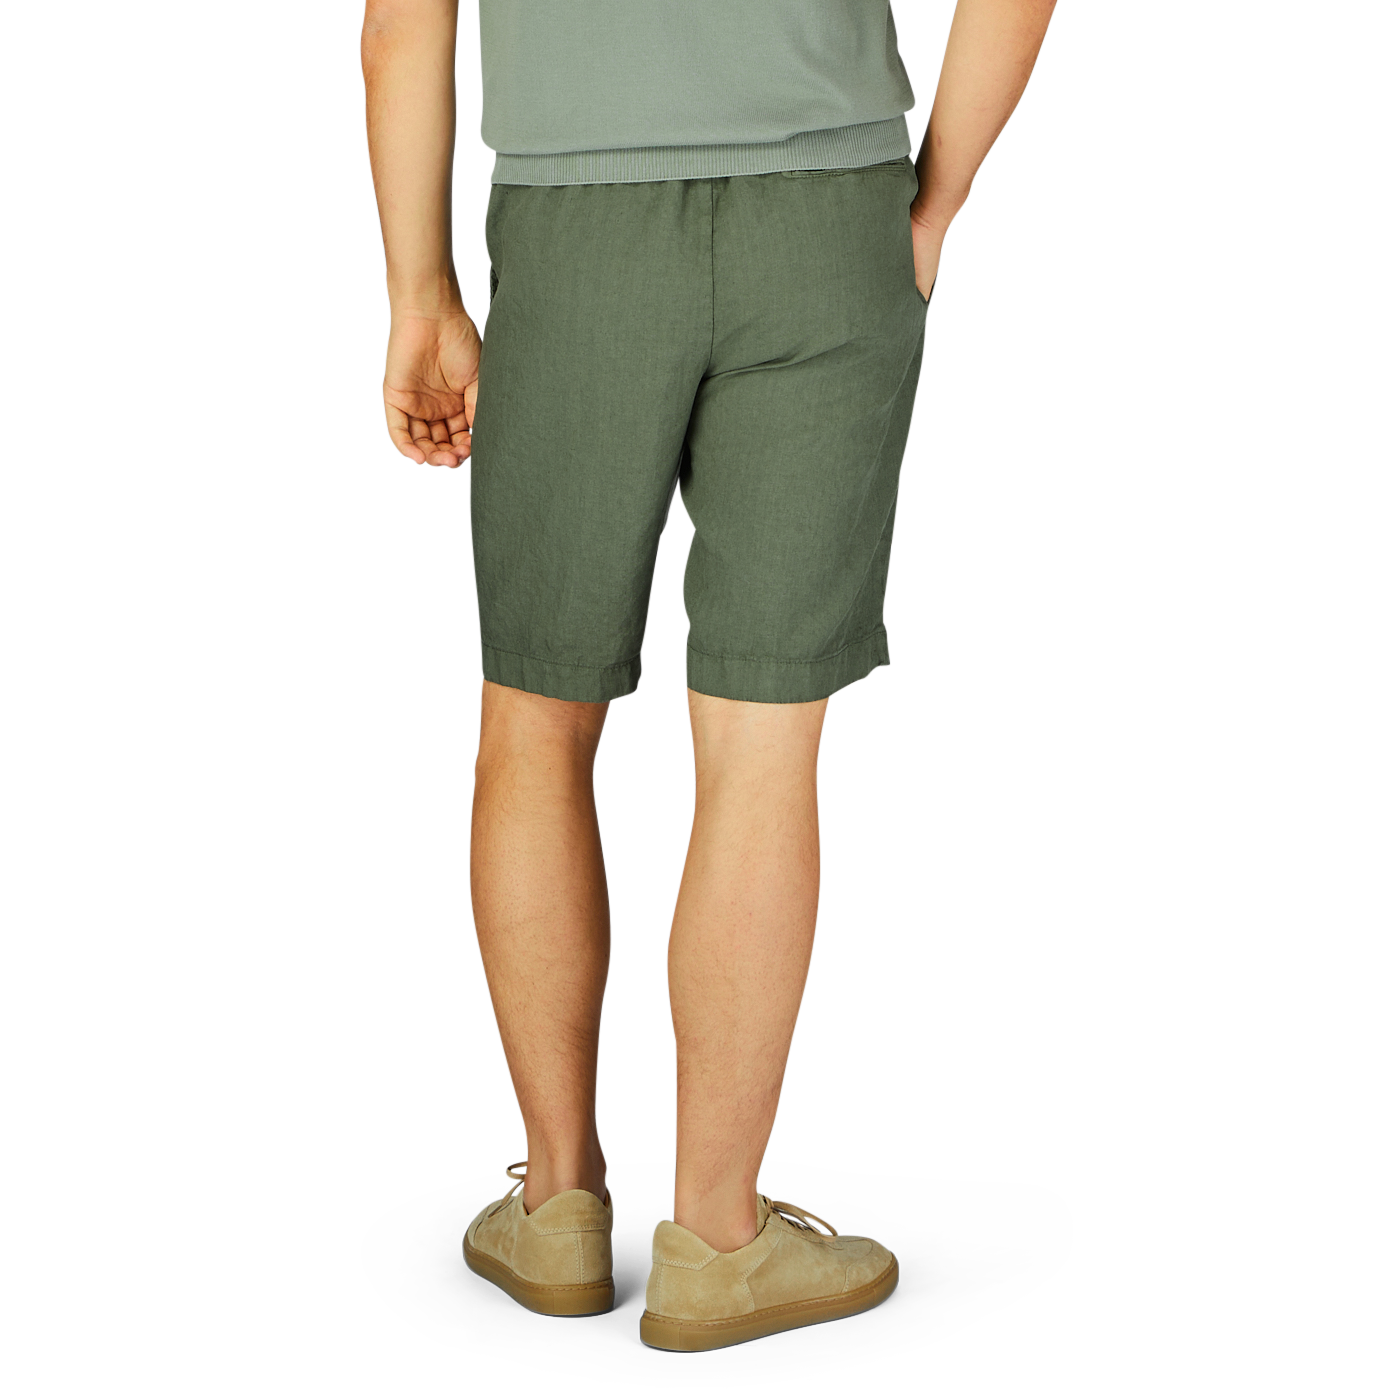 Person wearing Berwich militare green washed linen drawstring shorts and beige slip-on shoes standing with their back to the camera.